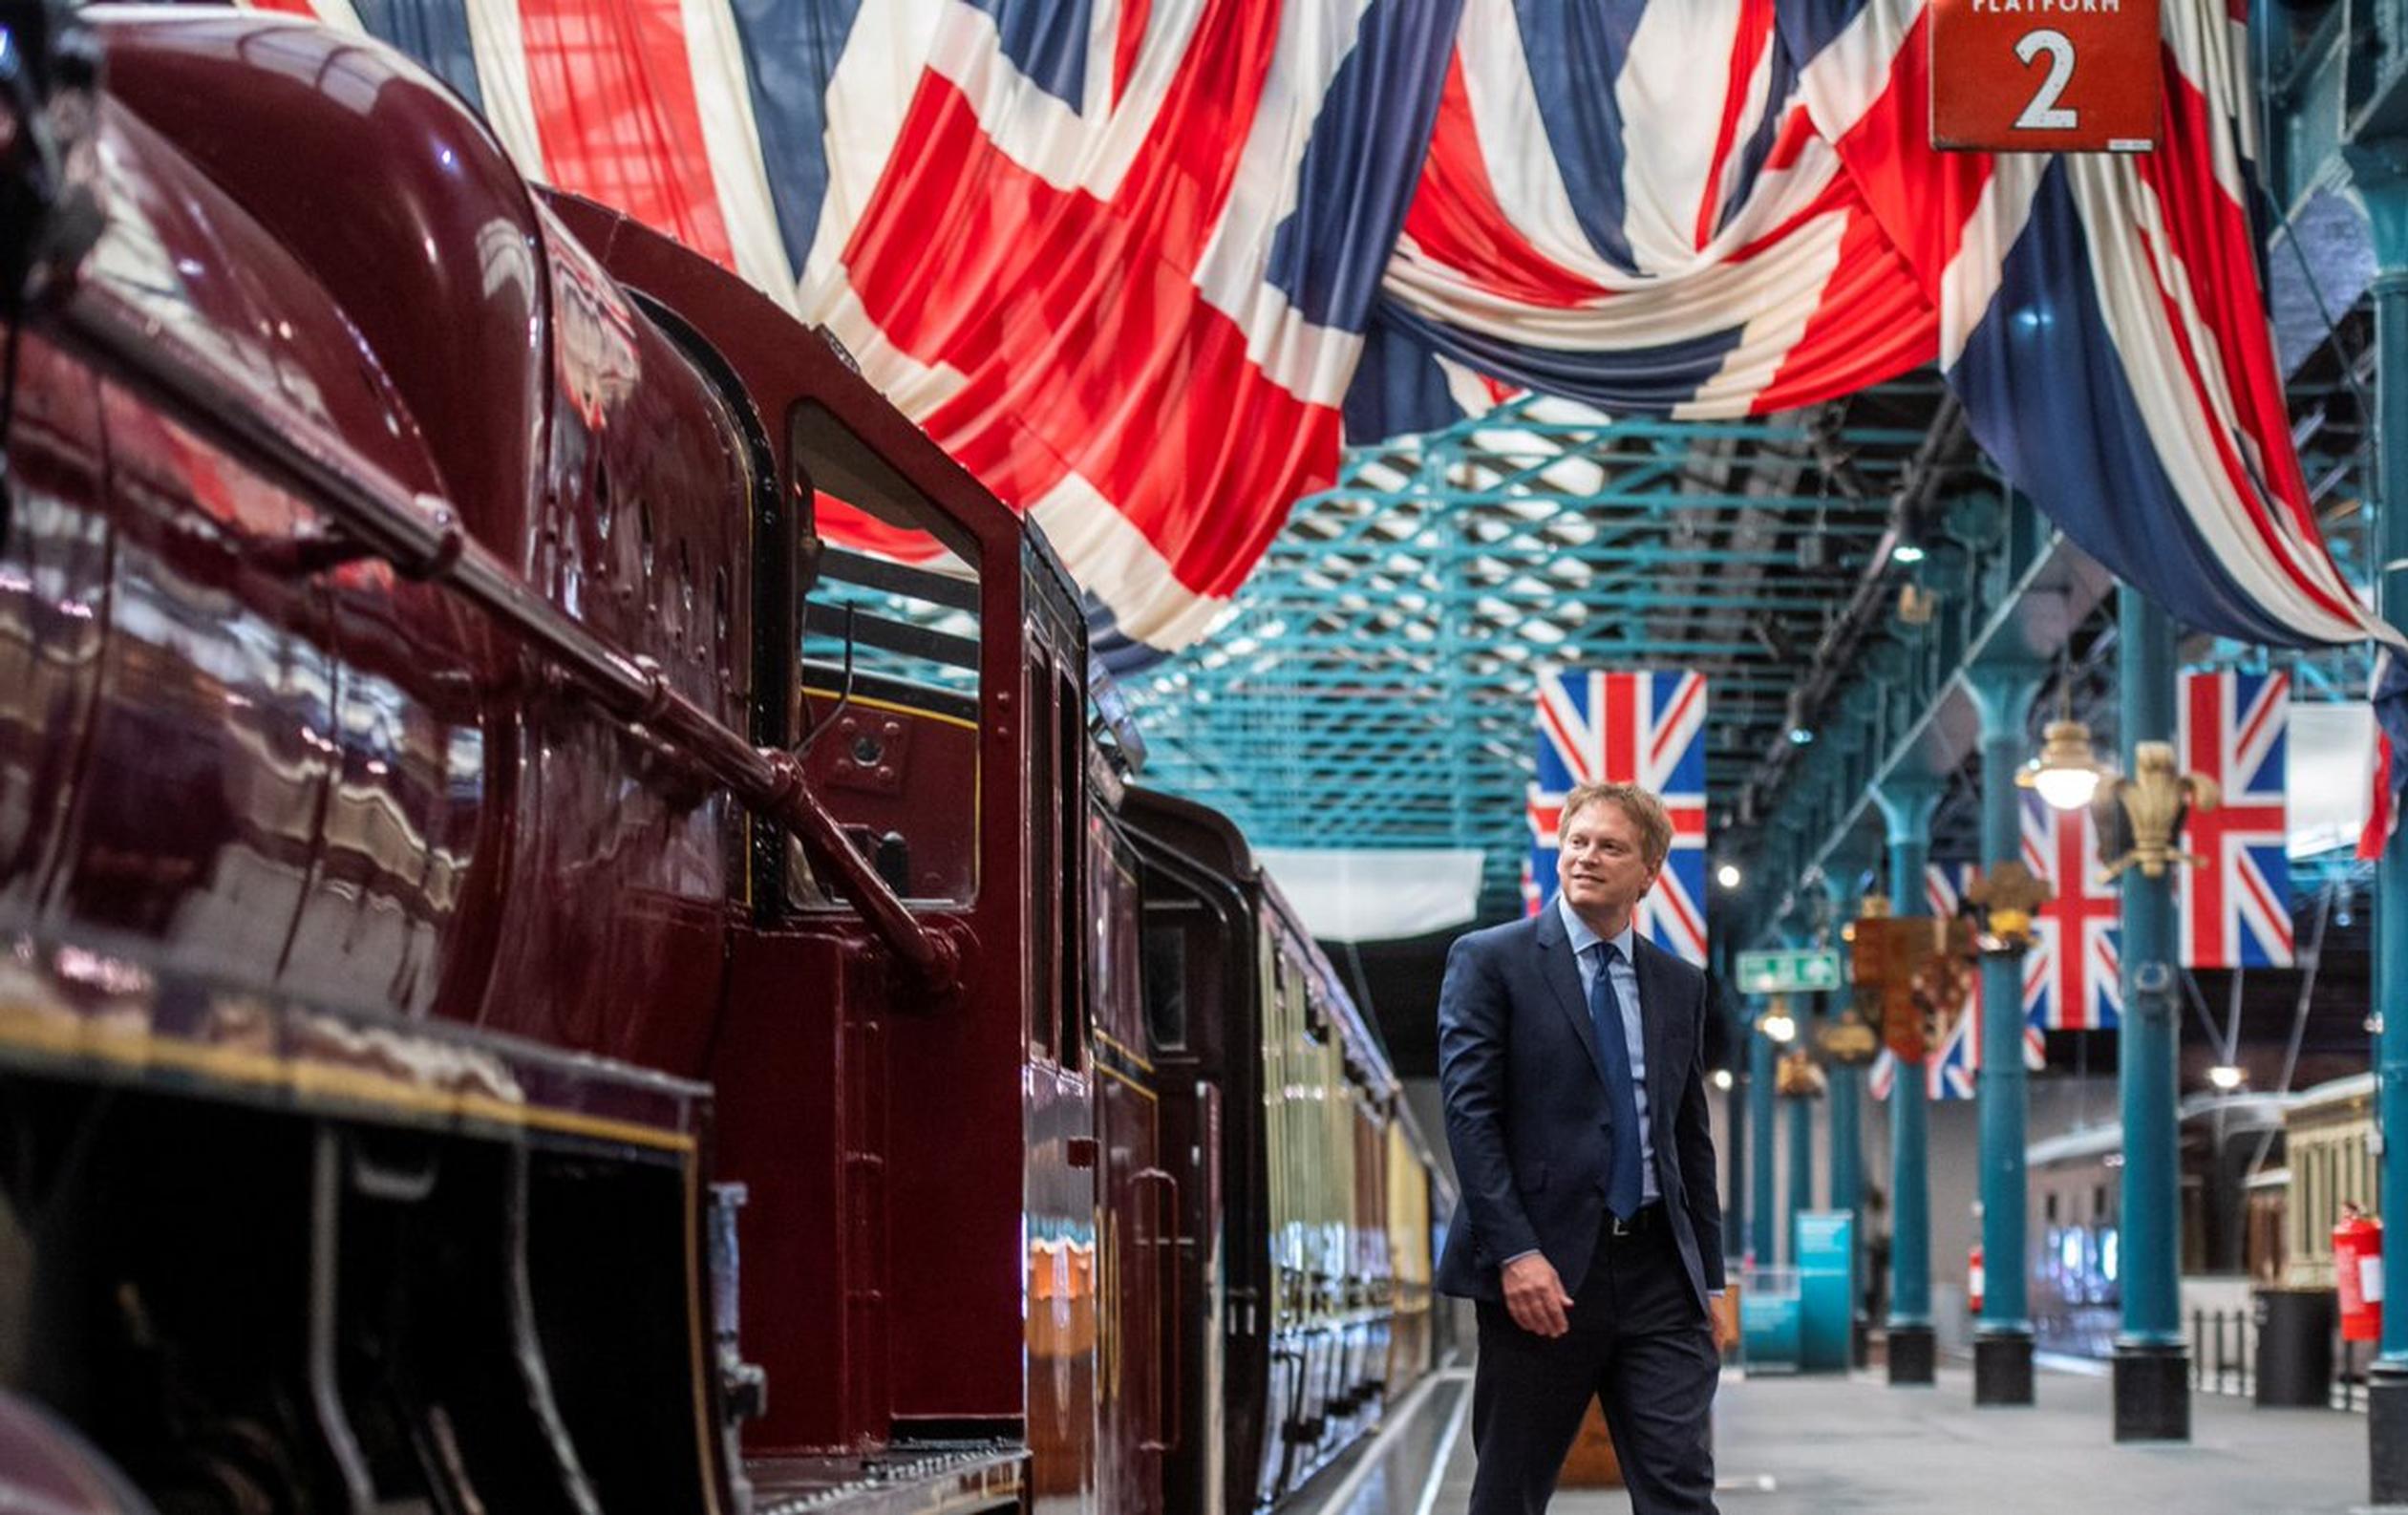 Transport Secretary Grant Shapps announced the creation of Great British Railways at the National Railway Museum